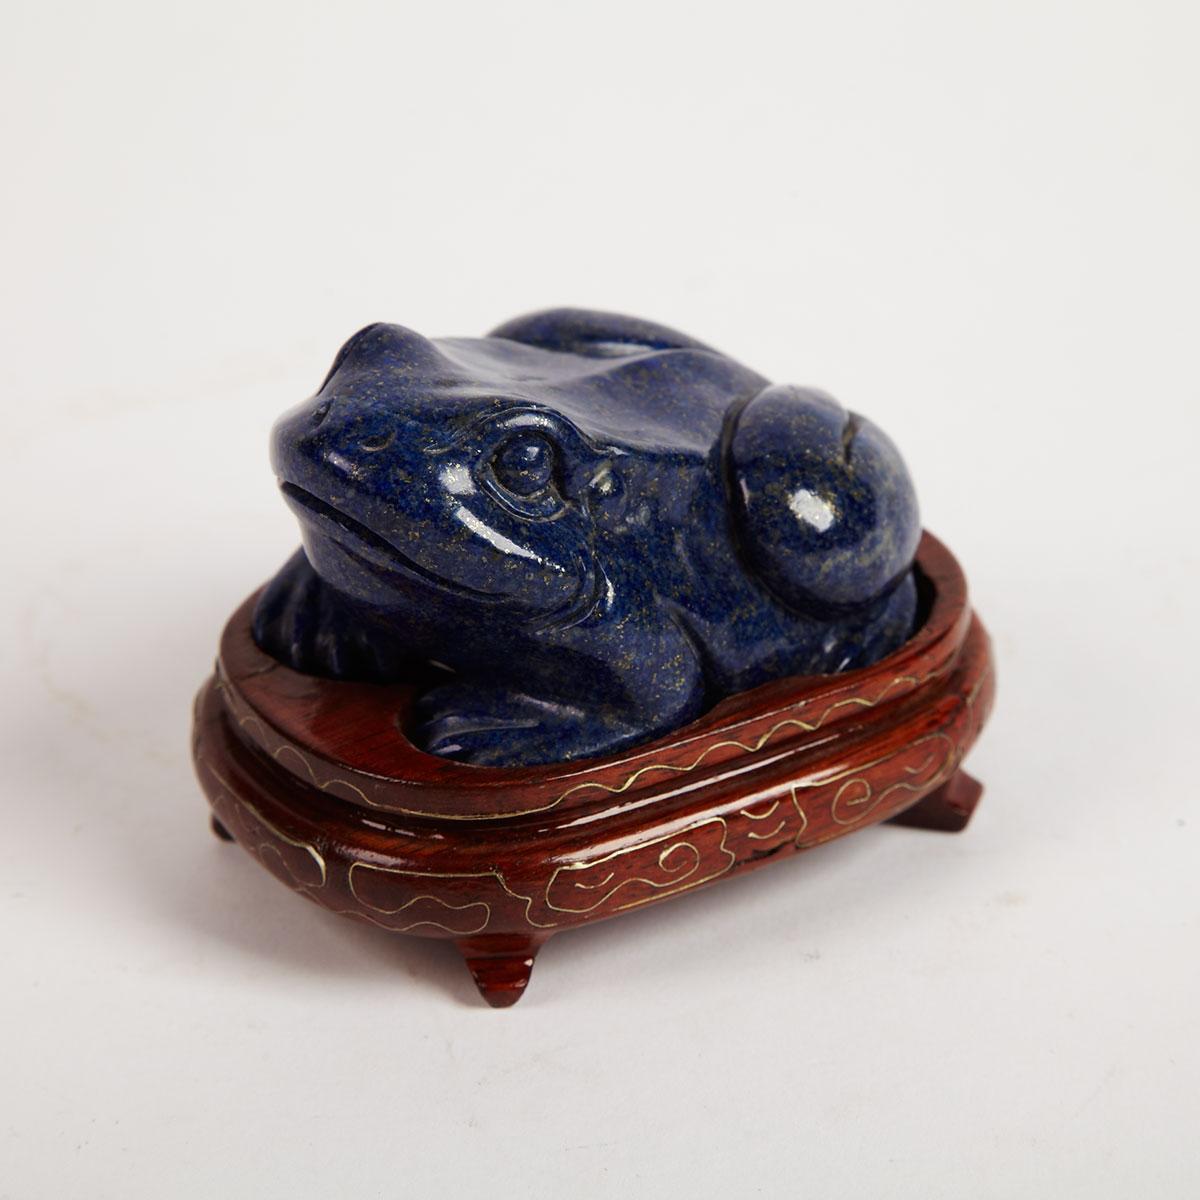 Lapis Lazuli Carved Toad